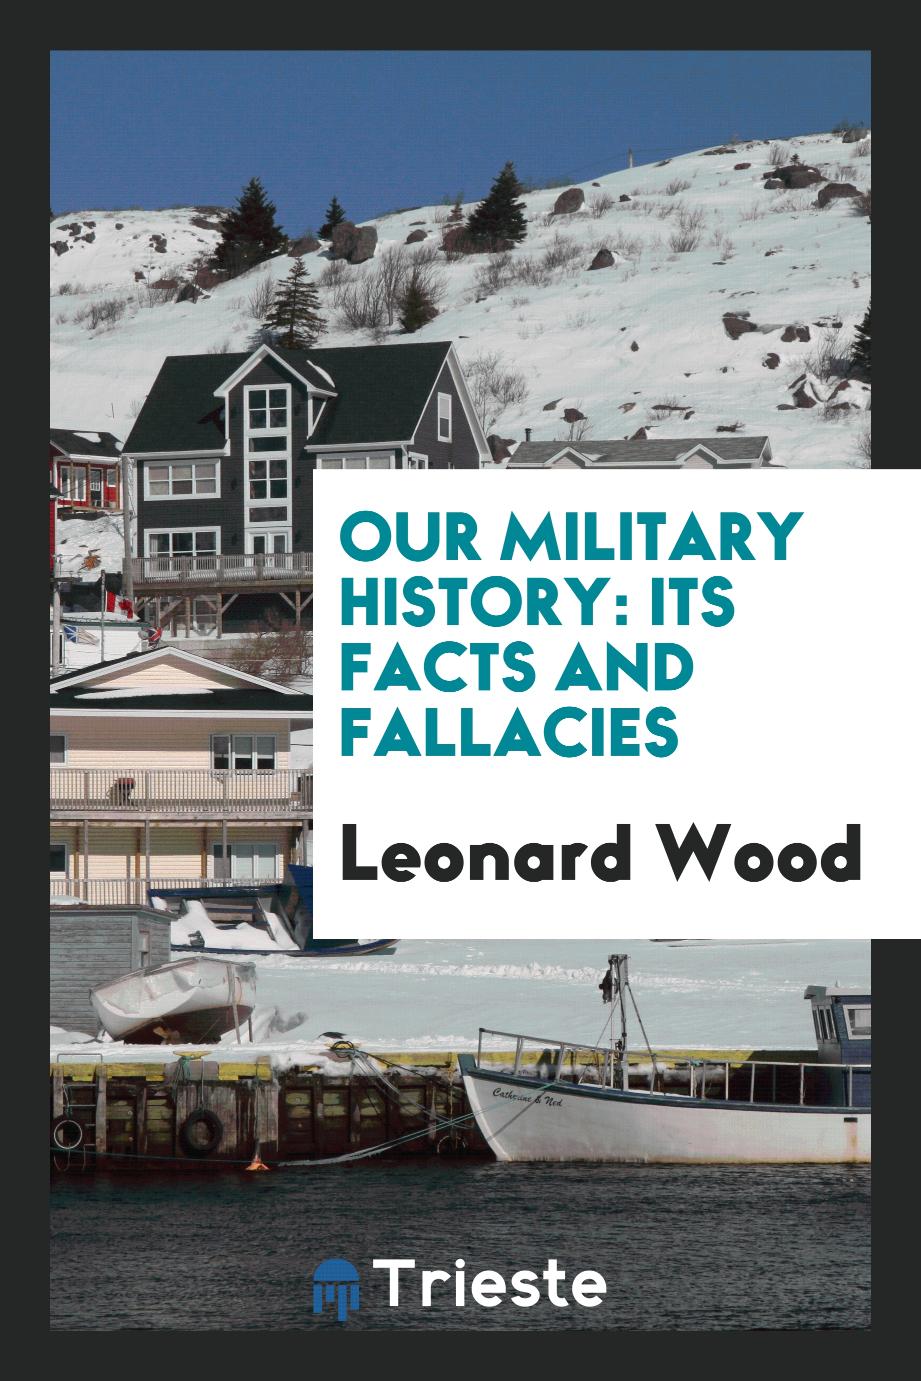 Our military history: its facts and fallacies